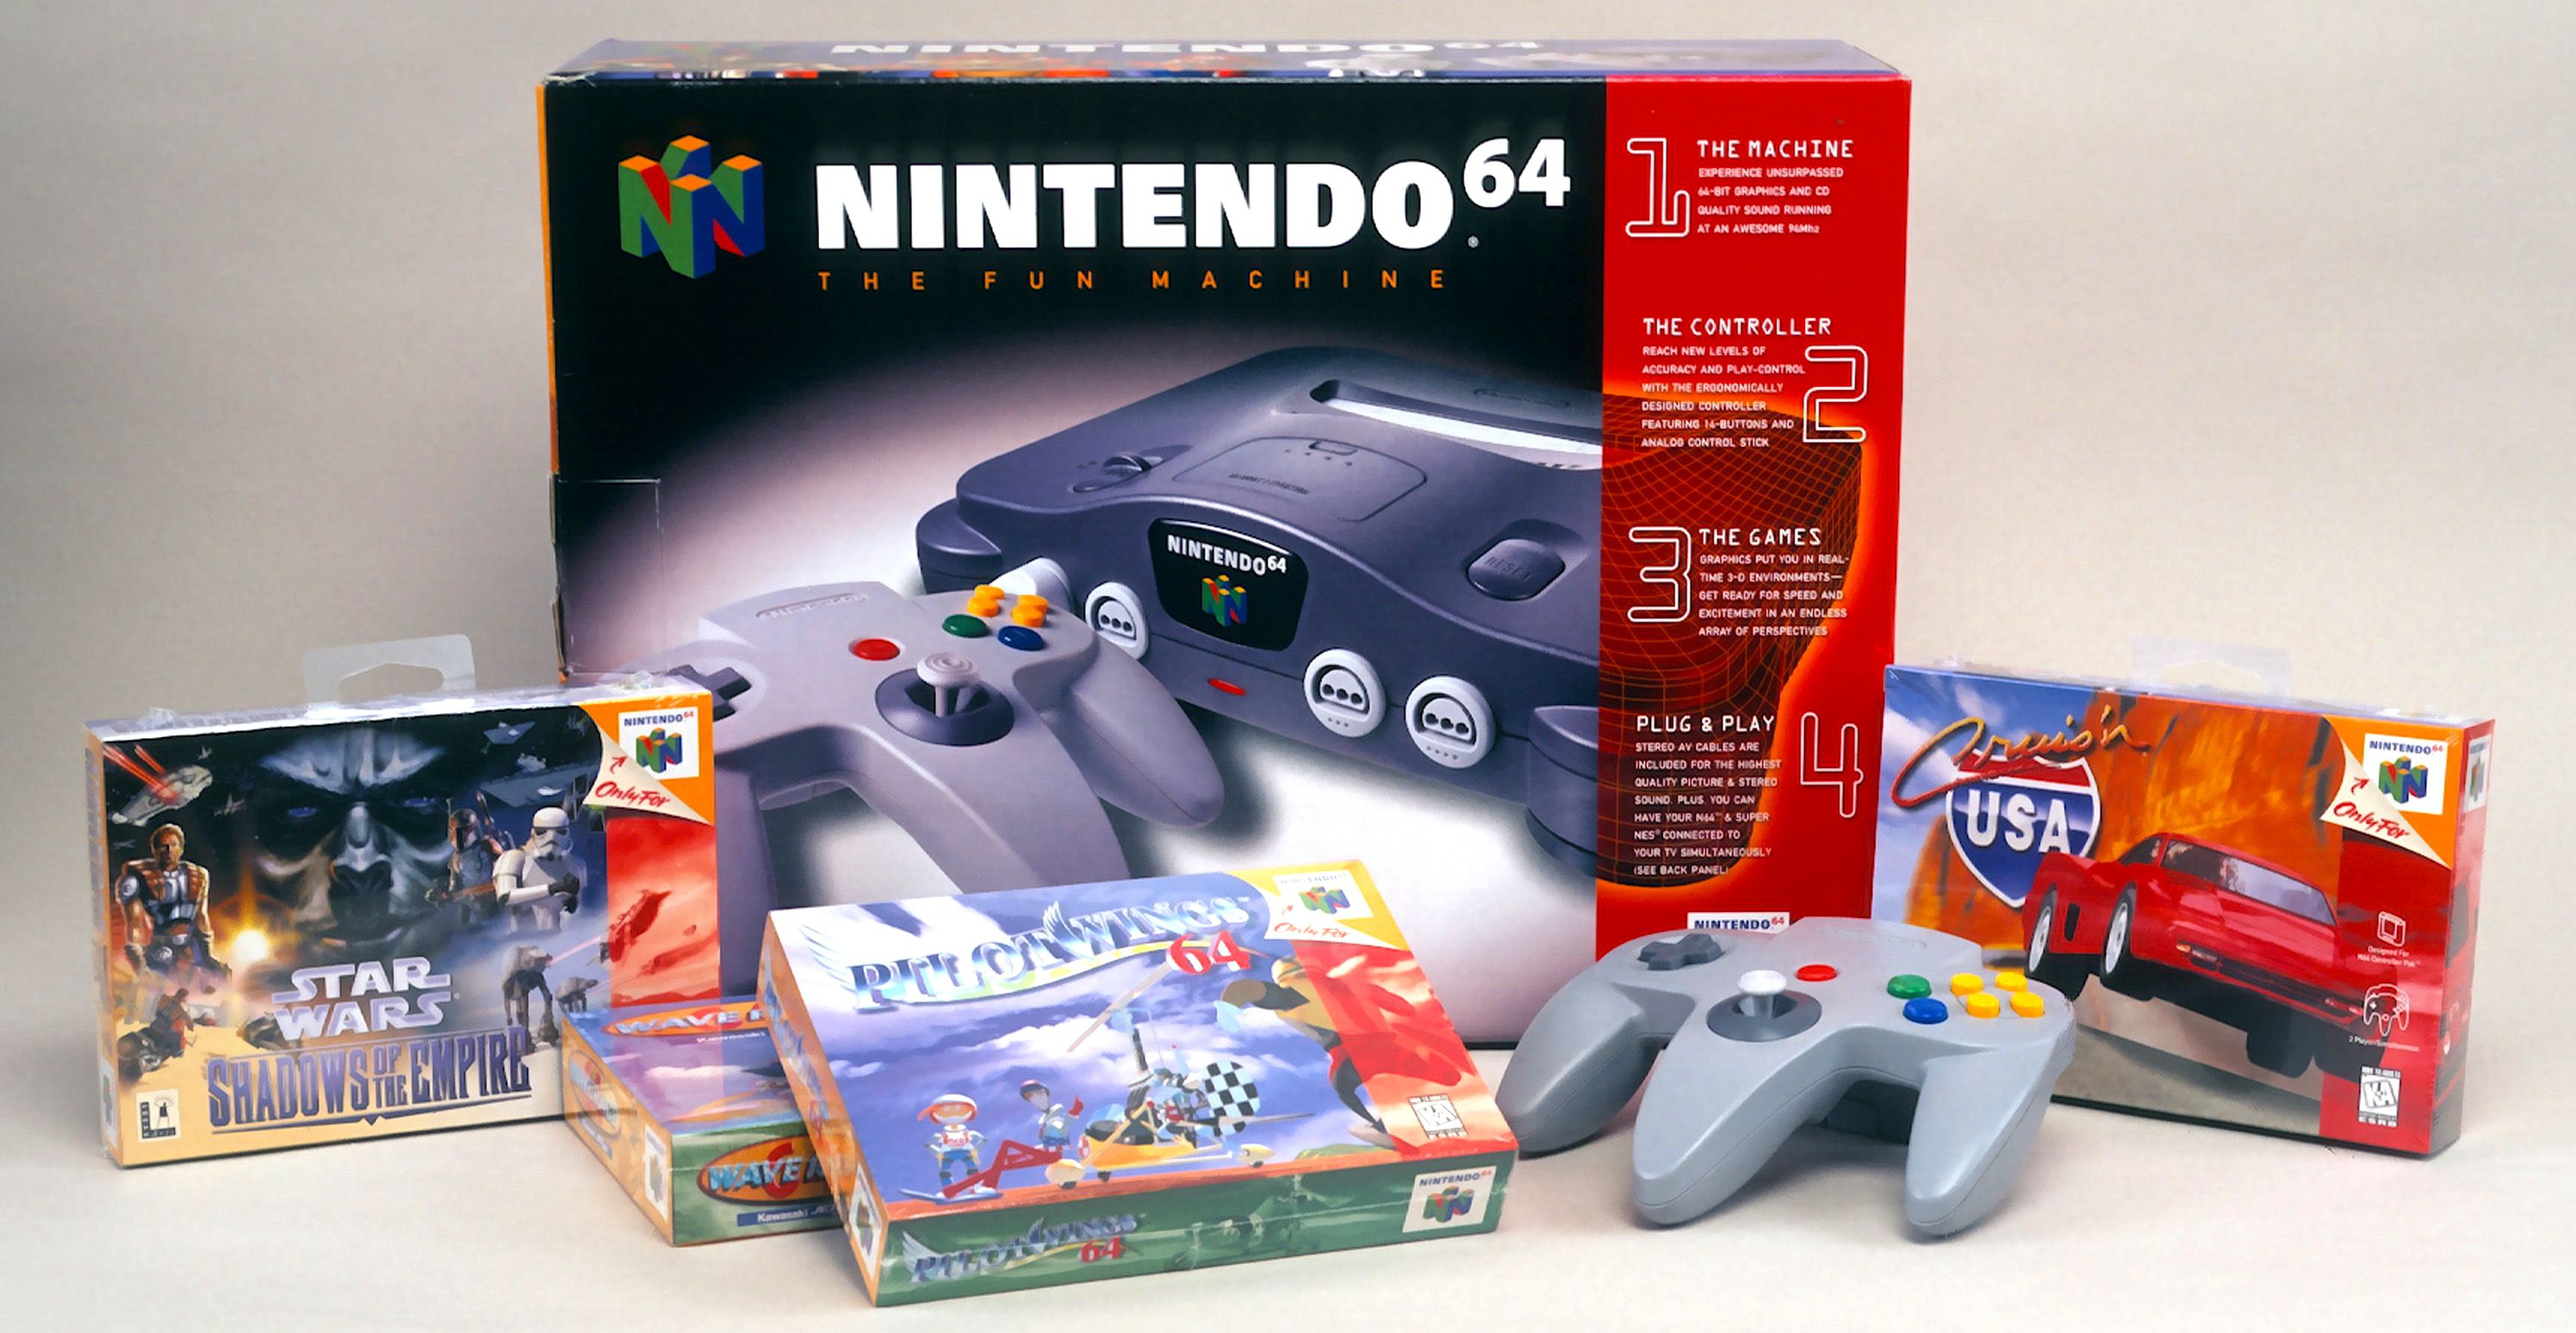 Nintendo 64 Classic May Be Coming Soon - Where to Find Nintendo Classic Consoles